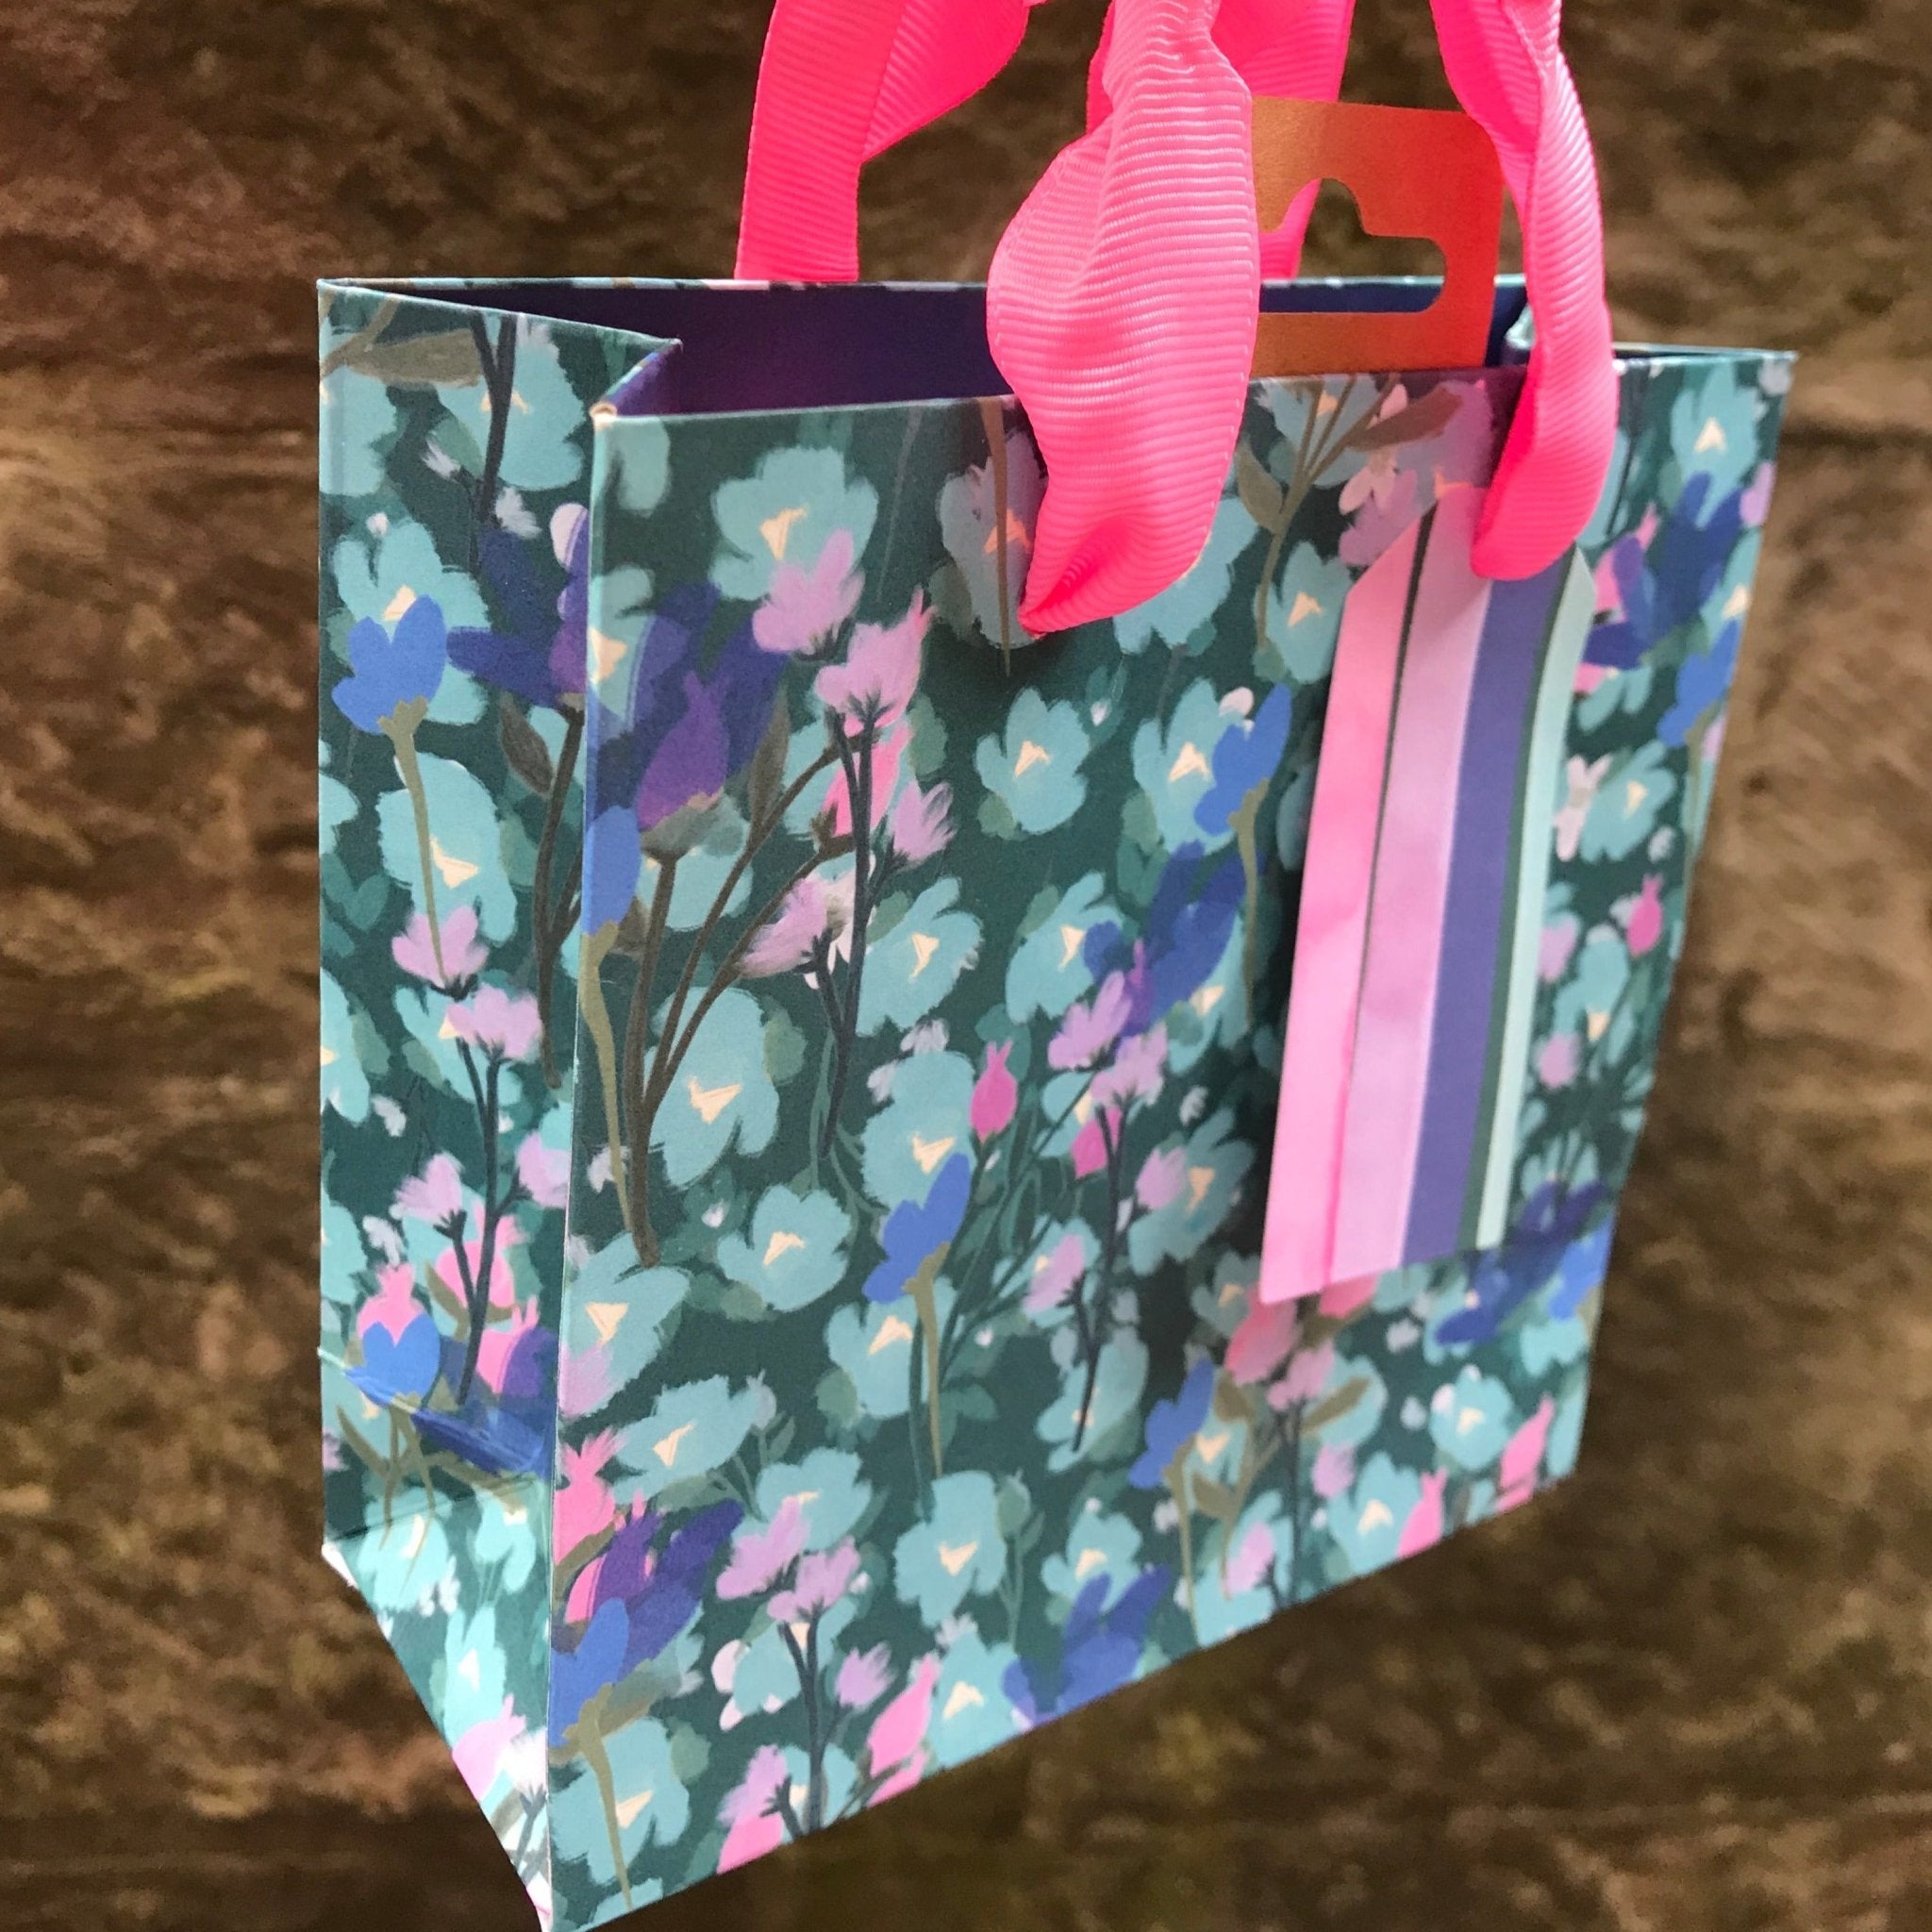 Meadow Small Gift Bag - The Nancy Smillie Shop - Art, Jewellery & Designer Gifts Glasgow